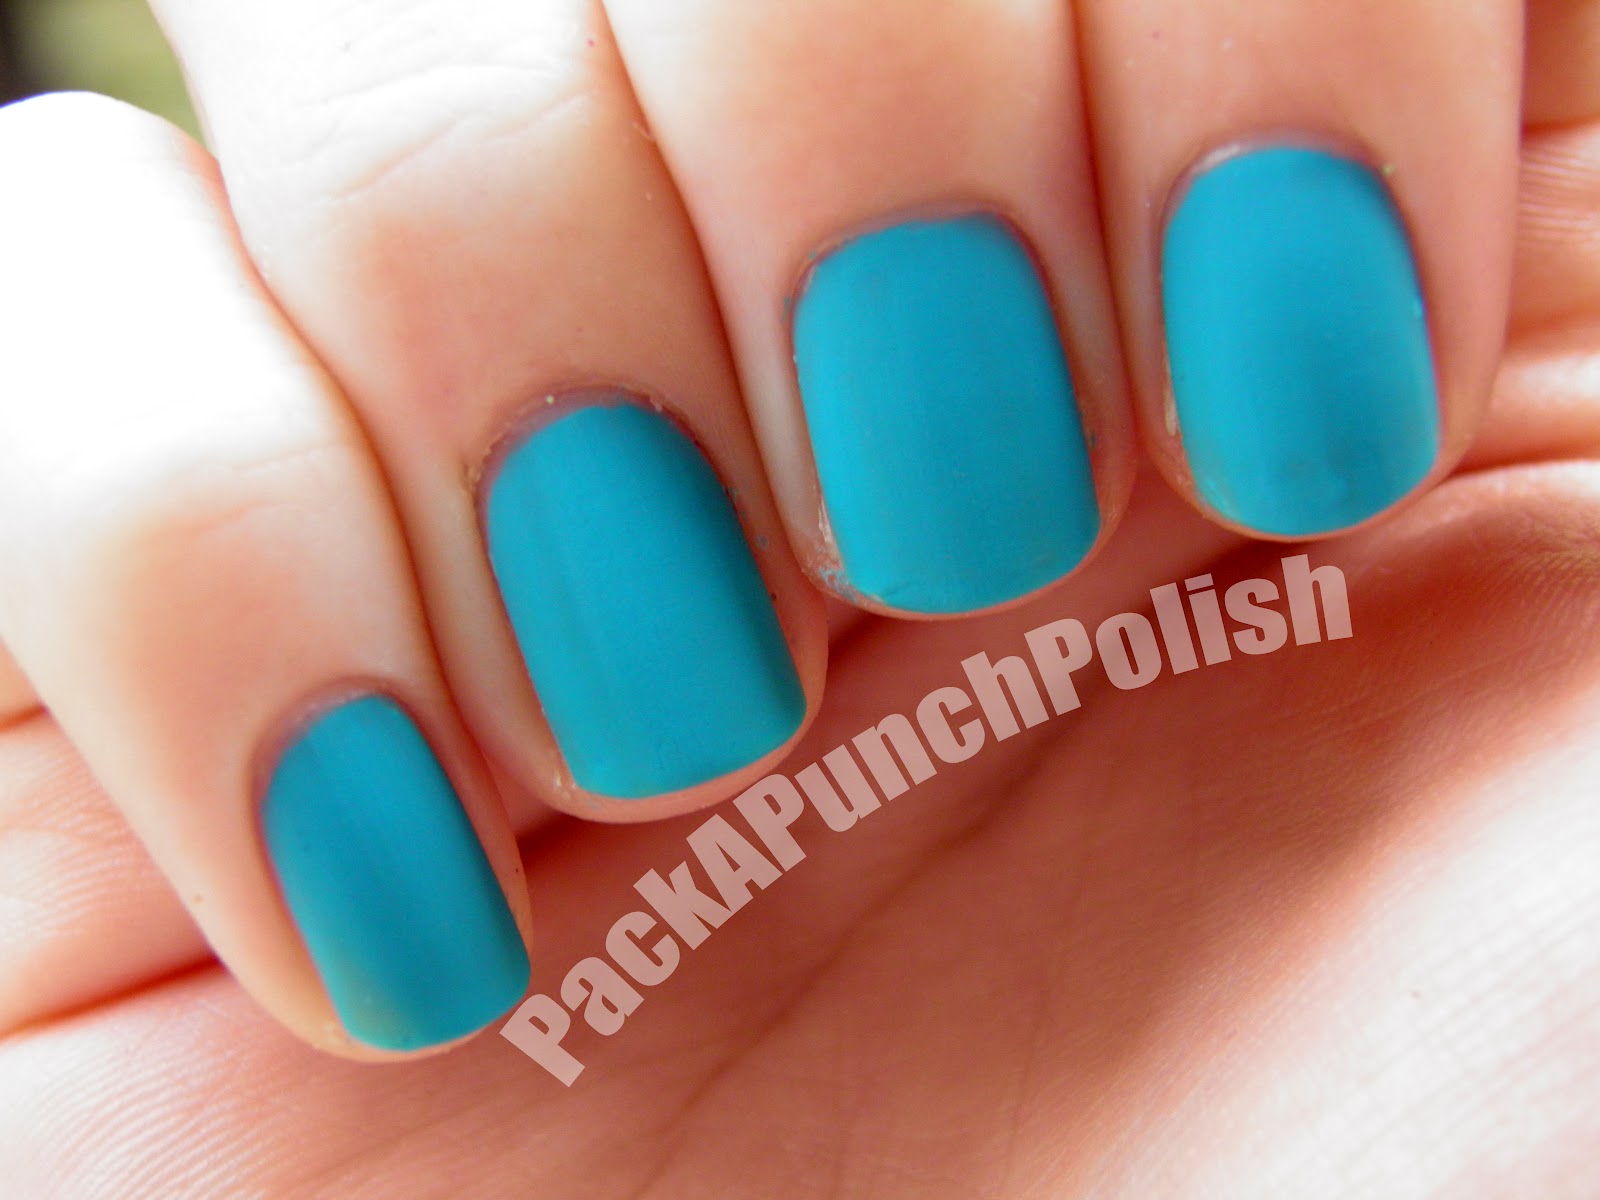 8. Sinful Colors Professional Nail Polish in "Savage" - wide 9